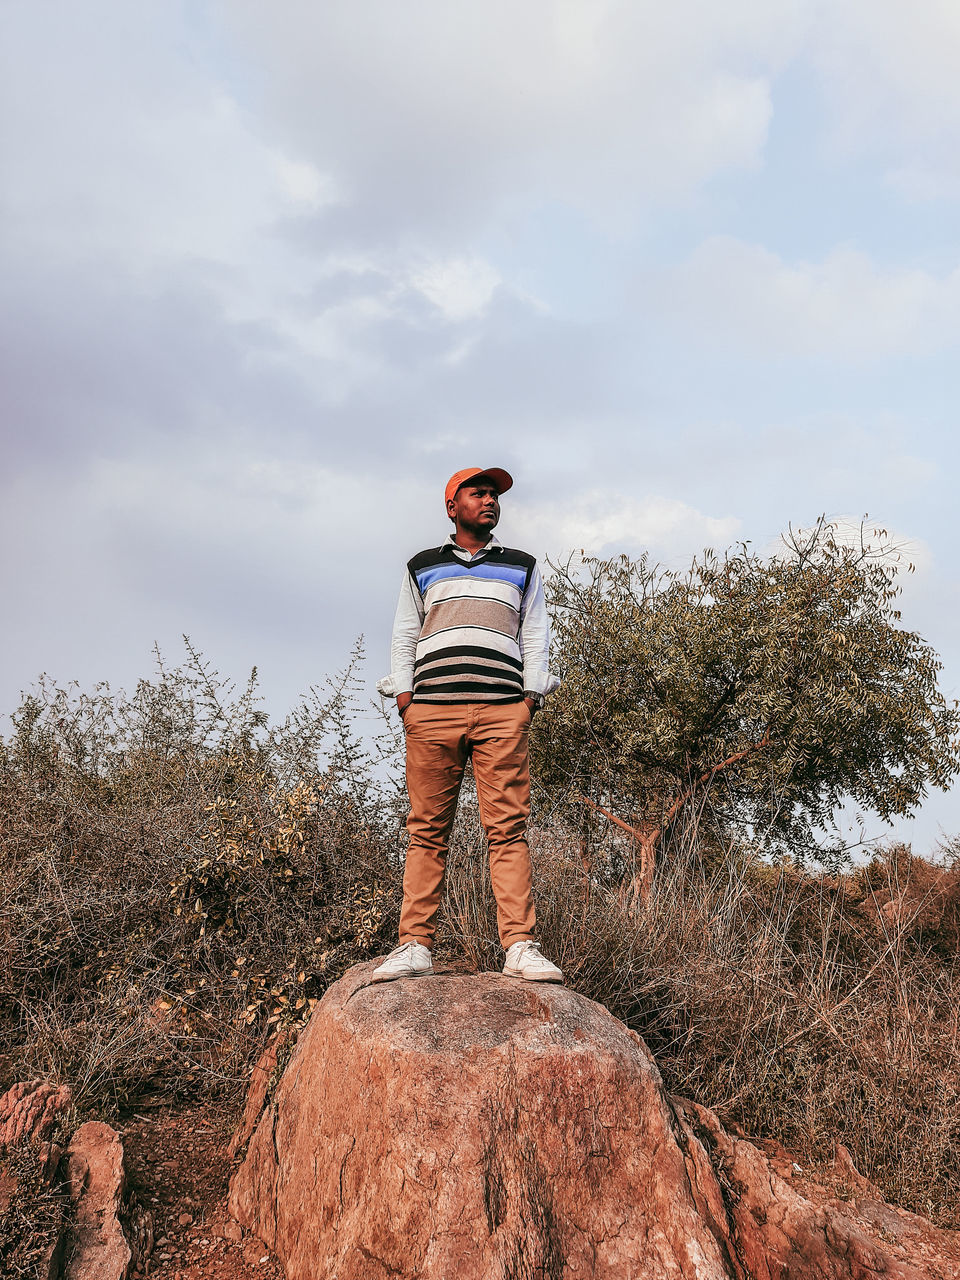 one person, sky, rock - object, rock, leisure activity, casual clothing, cloud - sky, plant, tree, solid, real people, standing, lifestyles, nature, full length, day, land, front view, young men, outdoors